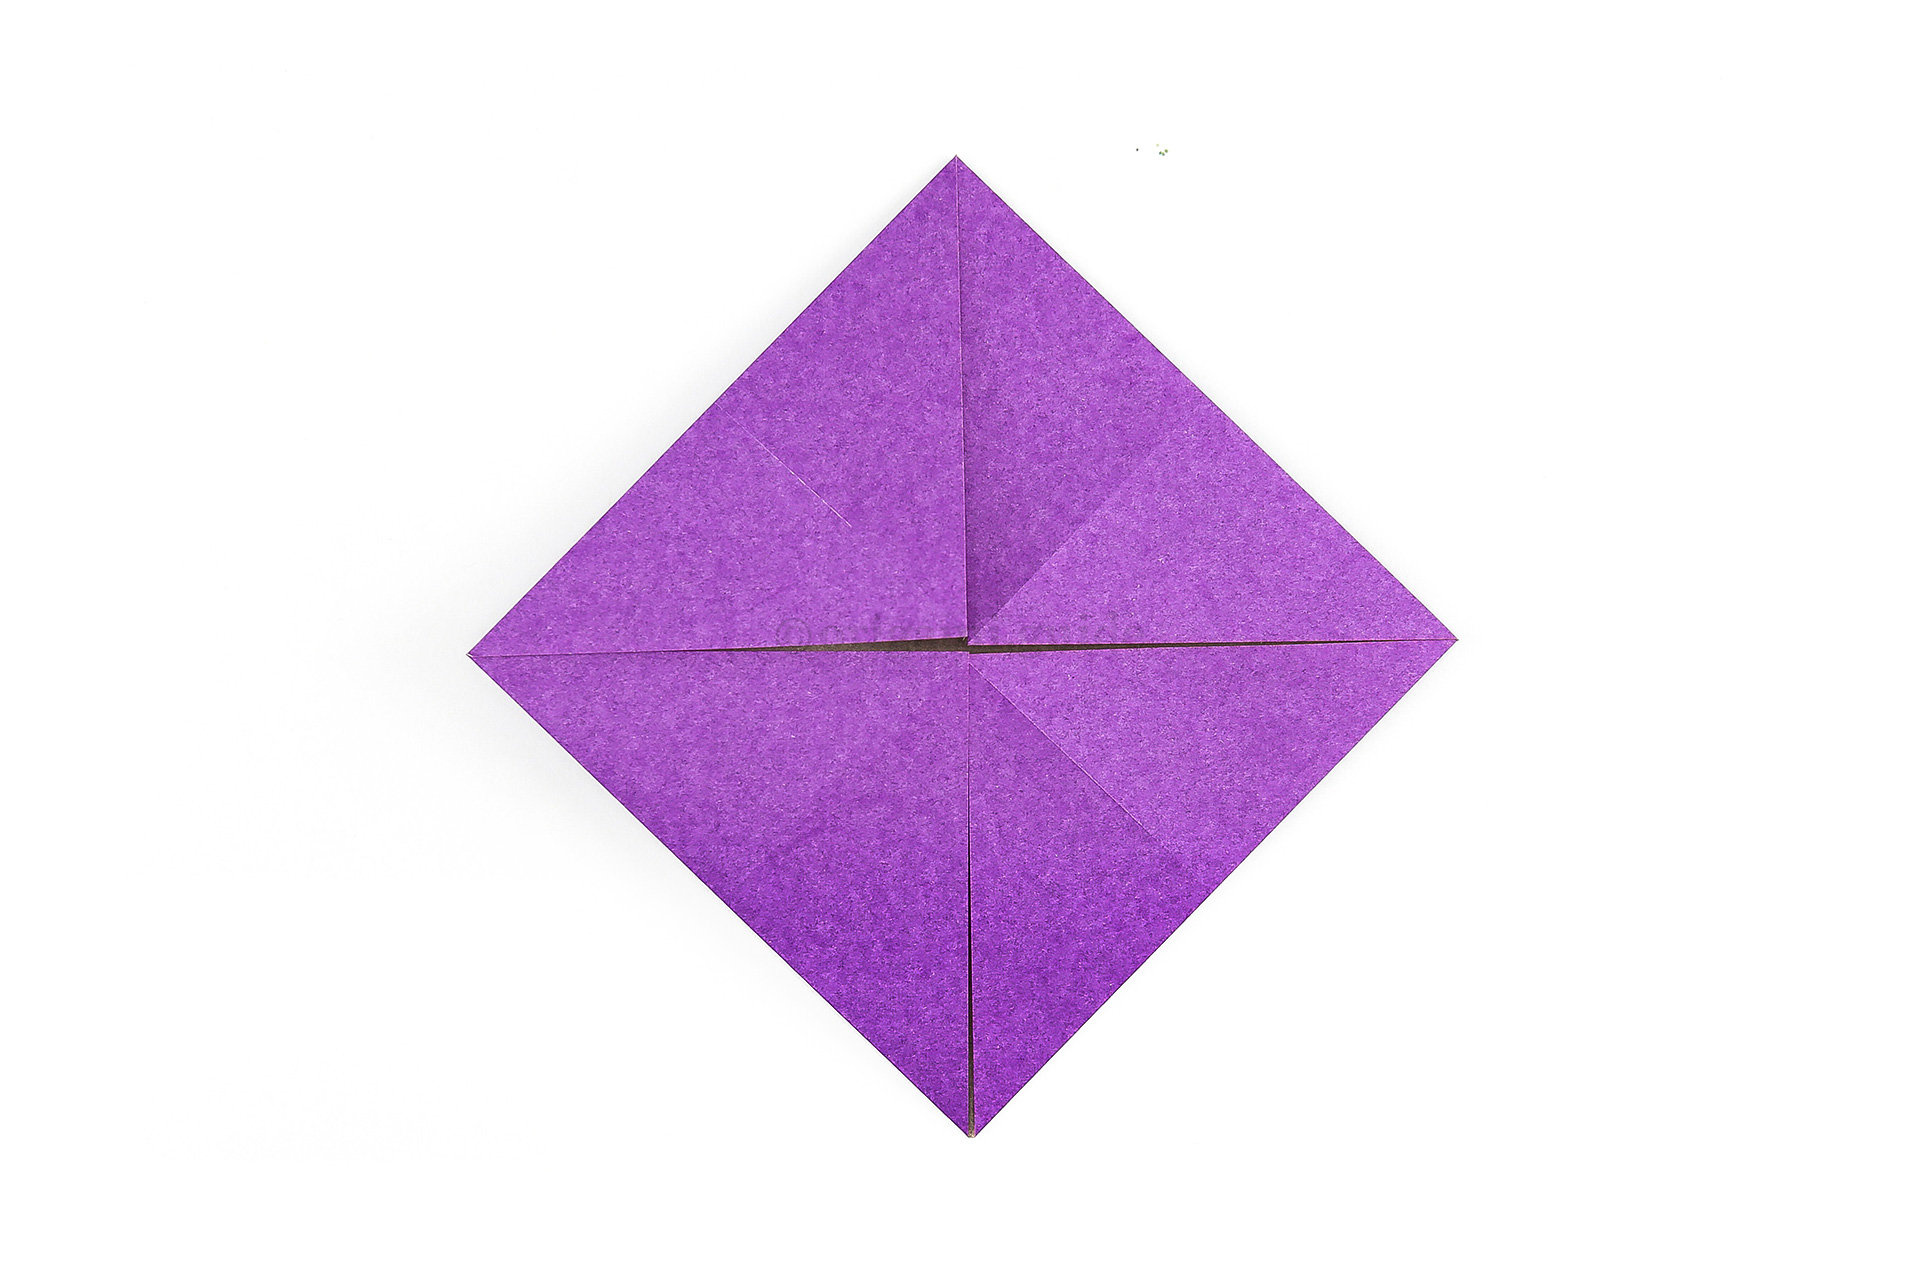 Now fold all of the other corners to the middle point.